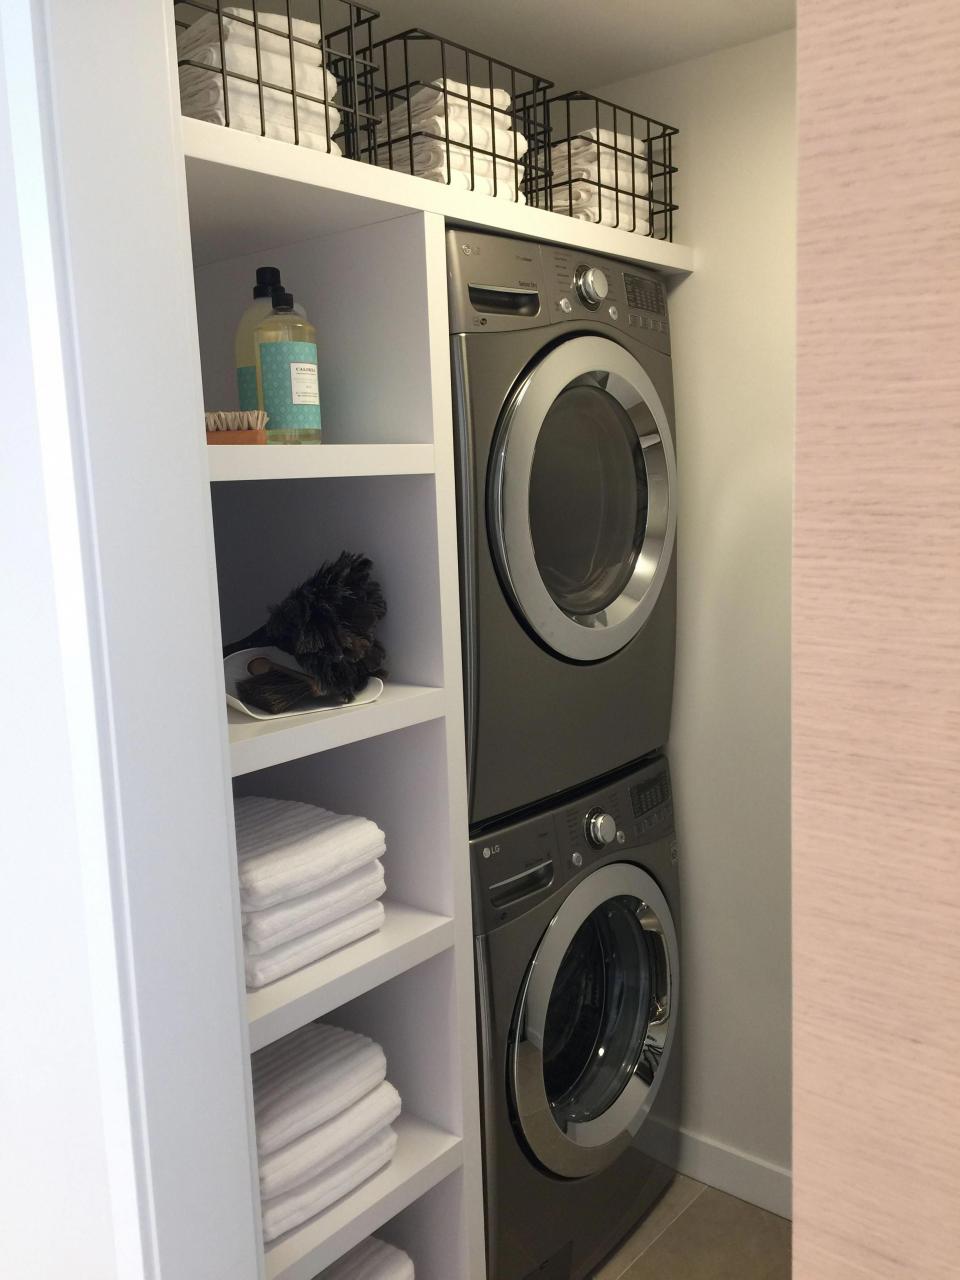 Find out additional info on "laundry room stackable ideas". Check out